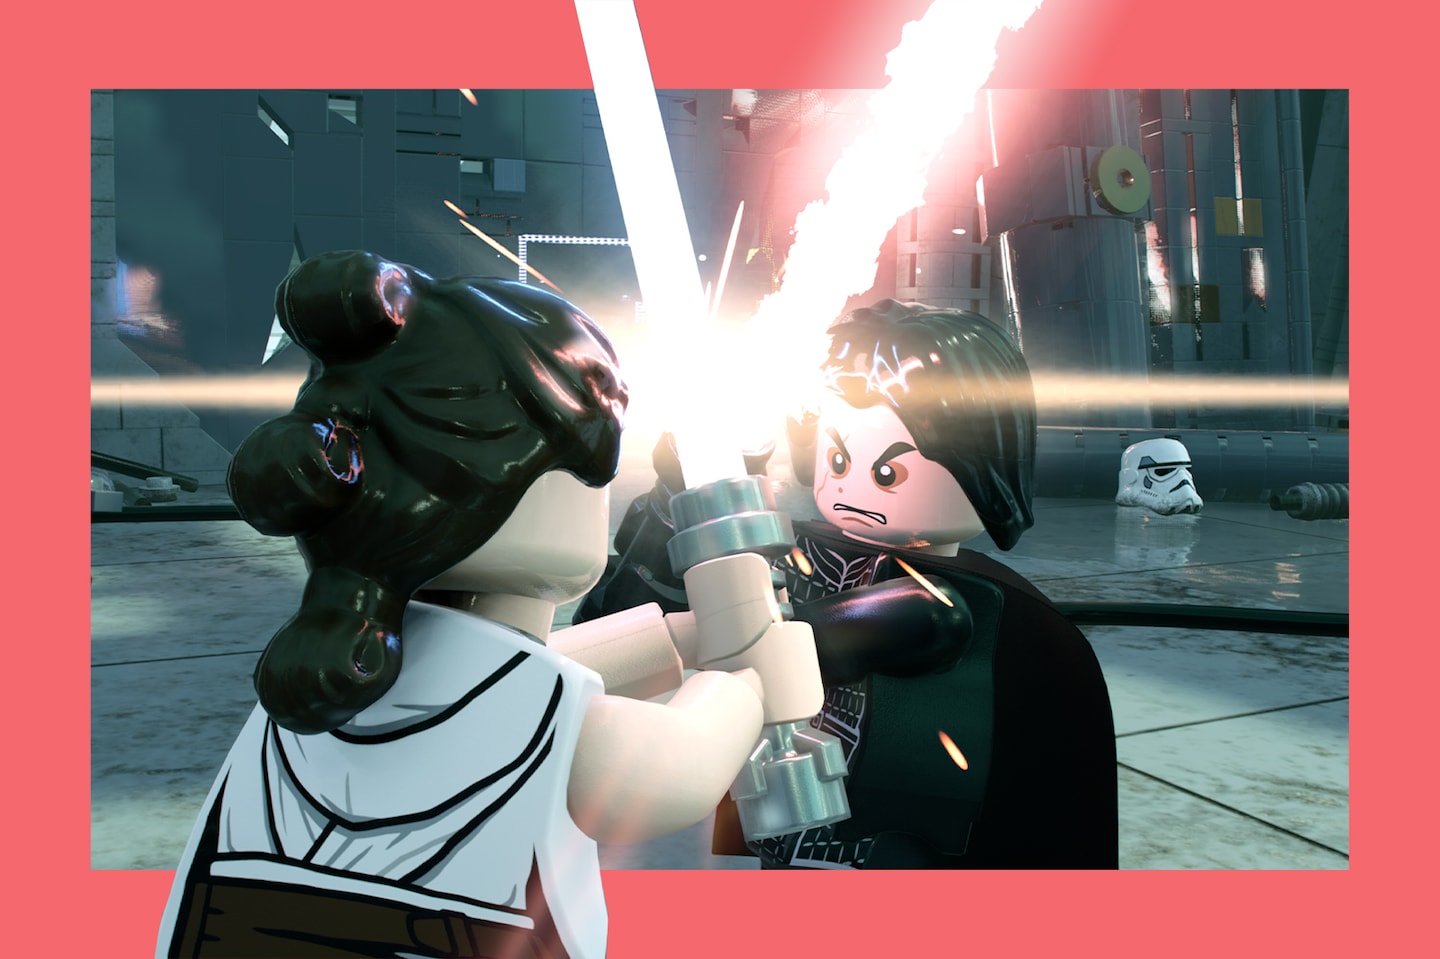 Lego Star Wars: The Skywalker Saga review: A fun game with too many extra pieces